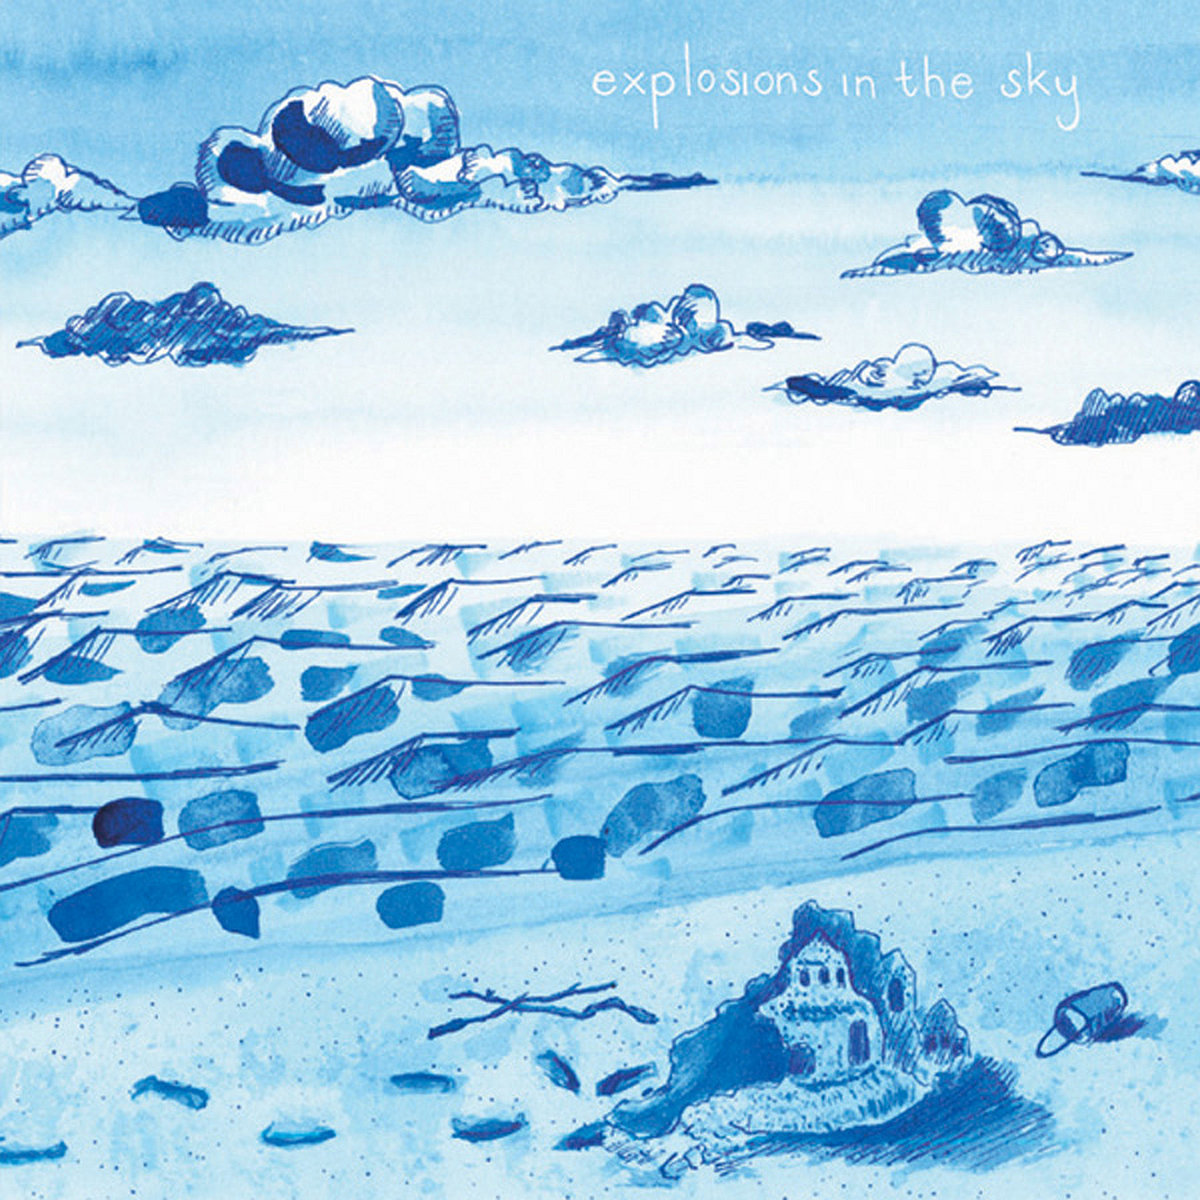 explosions in the sky discography torrent kickass